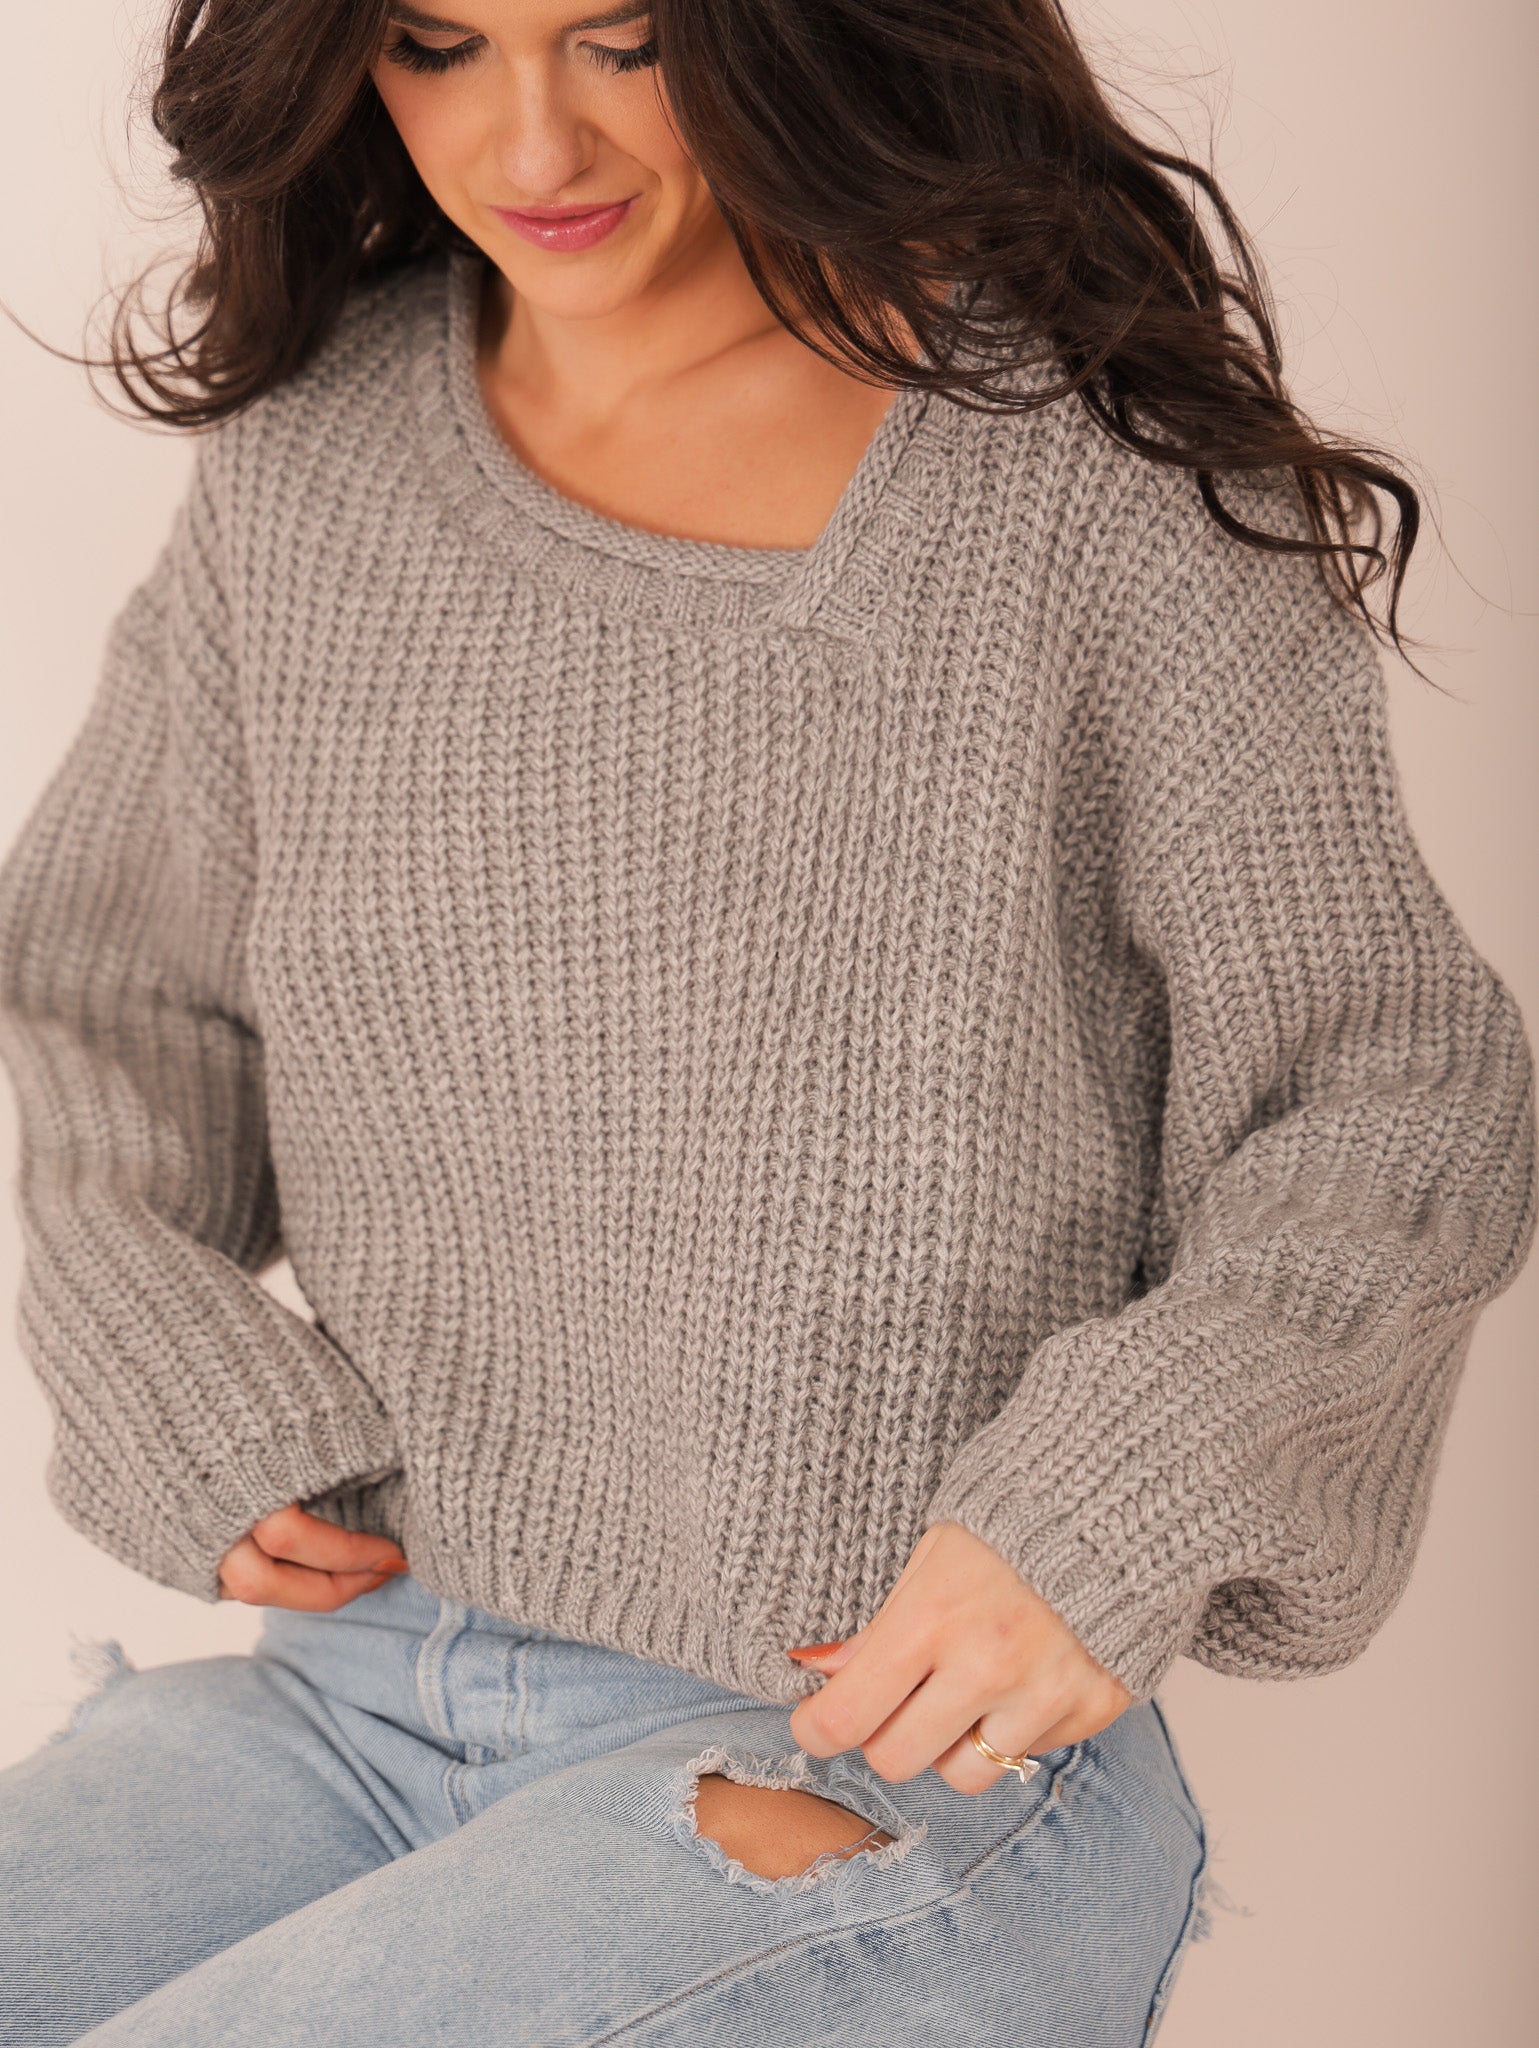 Molly Green - Sabrina Knit Sweater - Sweaters_Cardigans